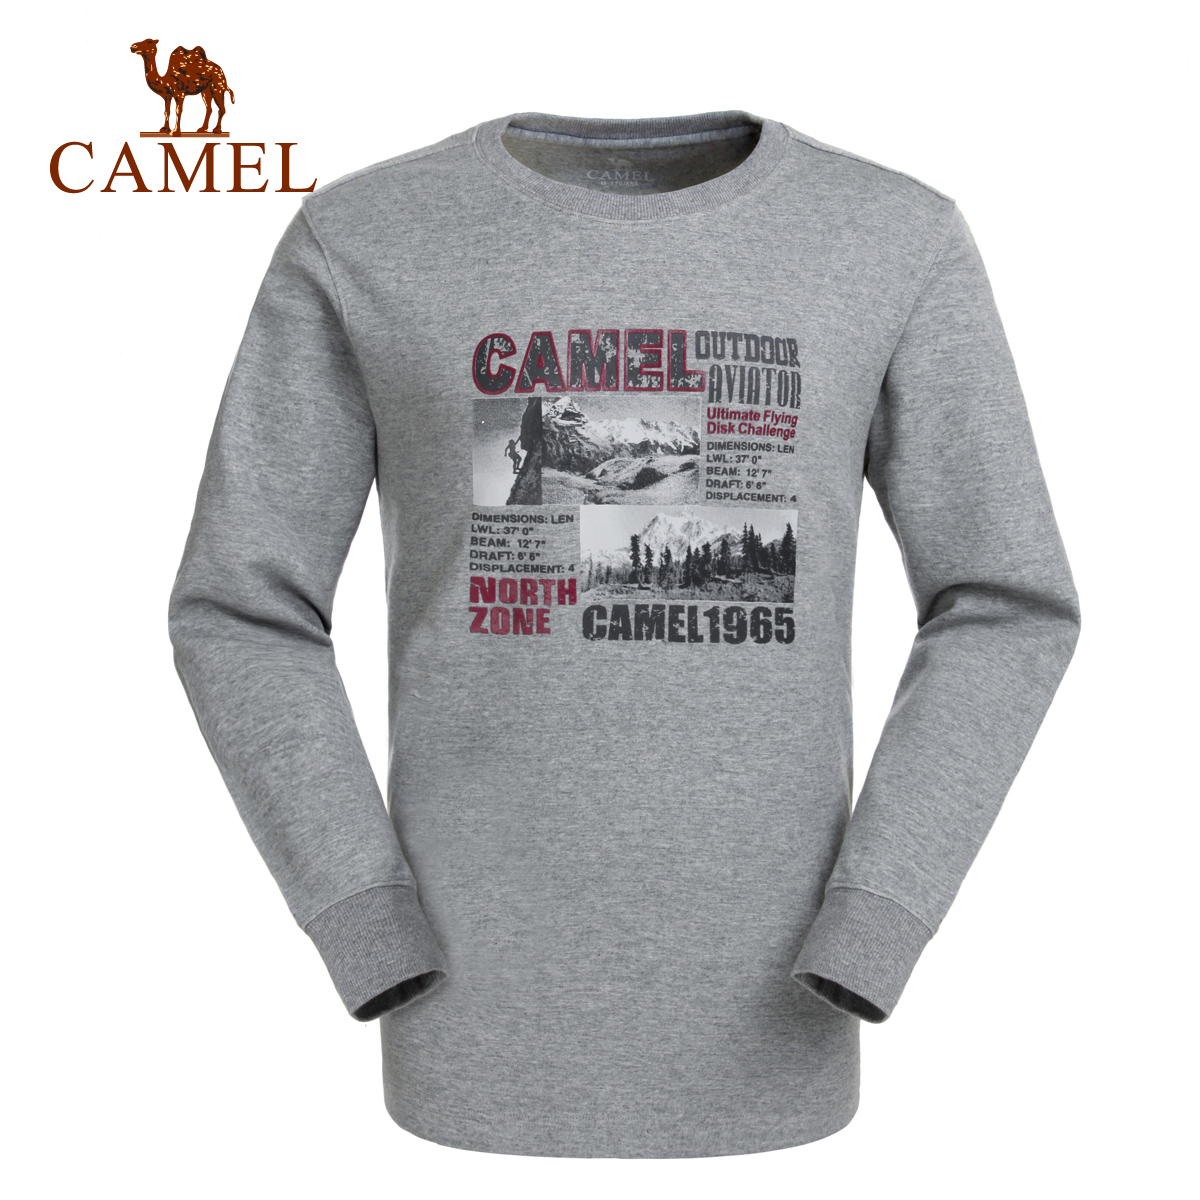 For camel outdoor casual clothing 2014 Men casual o-neck long-sleeve T-shirt a4w2z5210